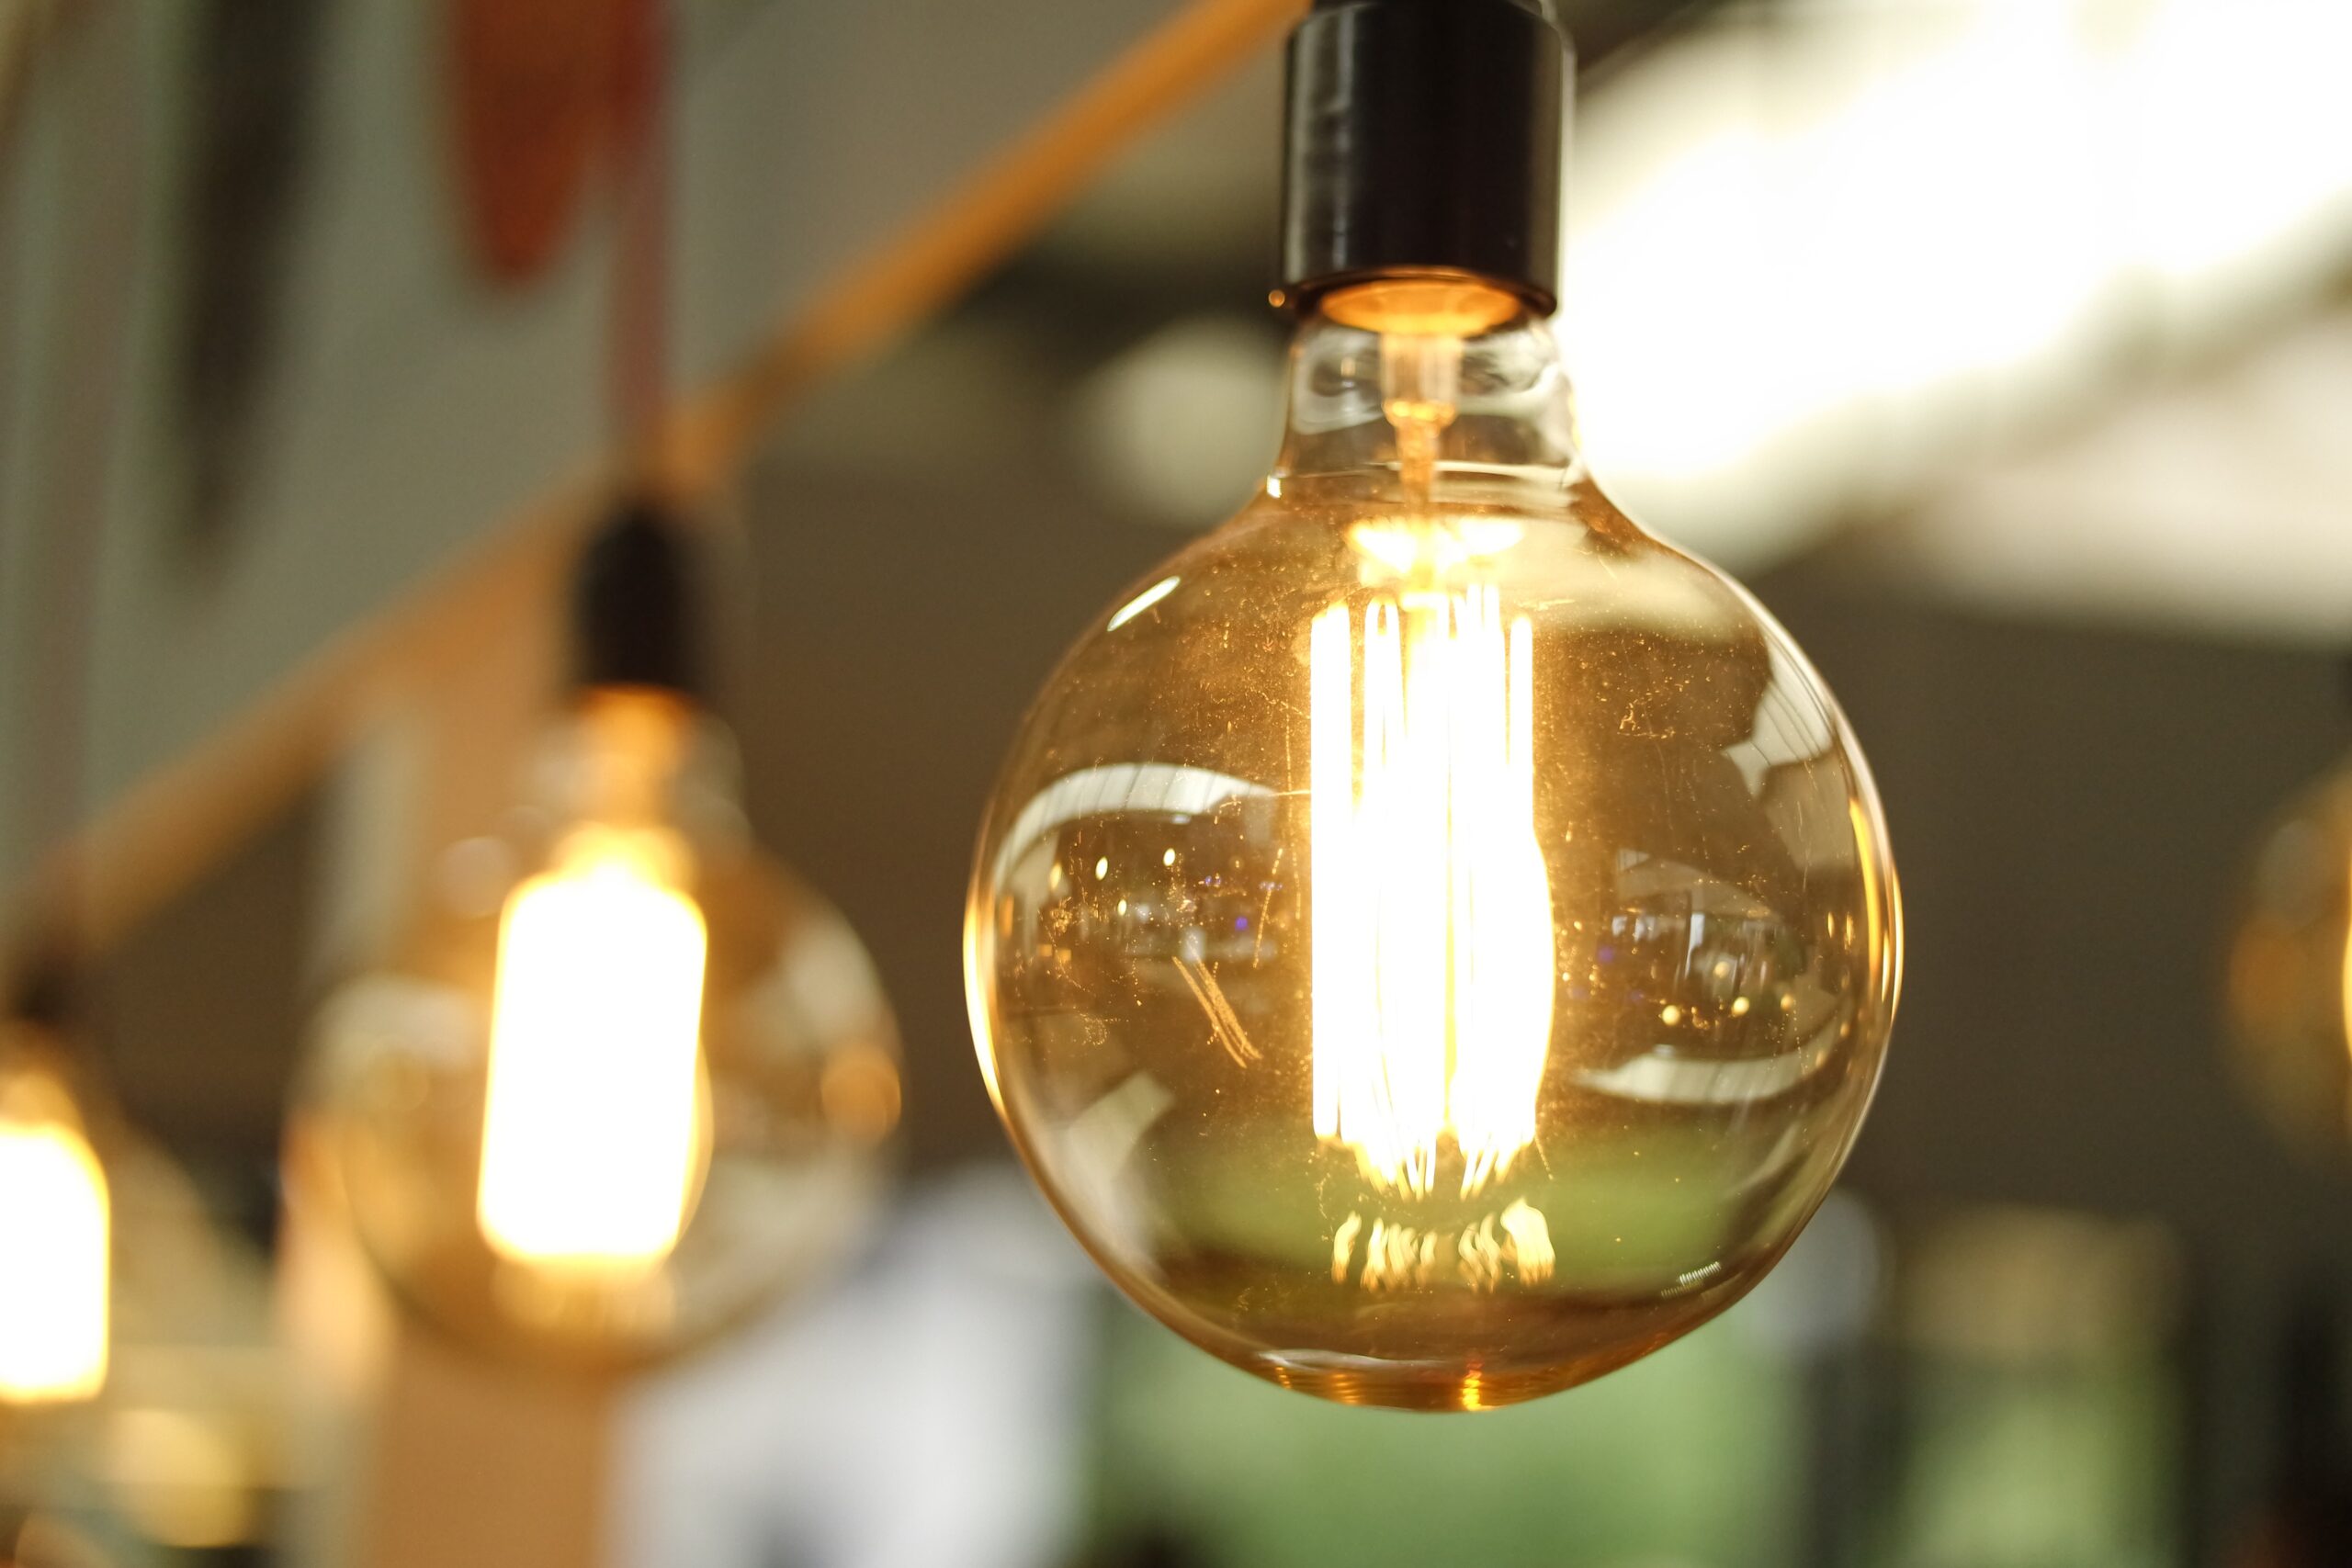 Incandescent lamp could save energy by recycling infrared light